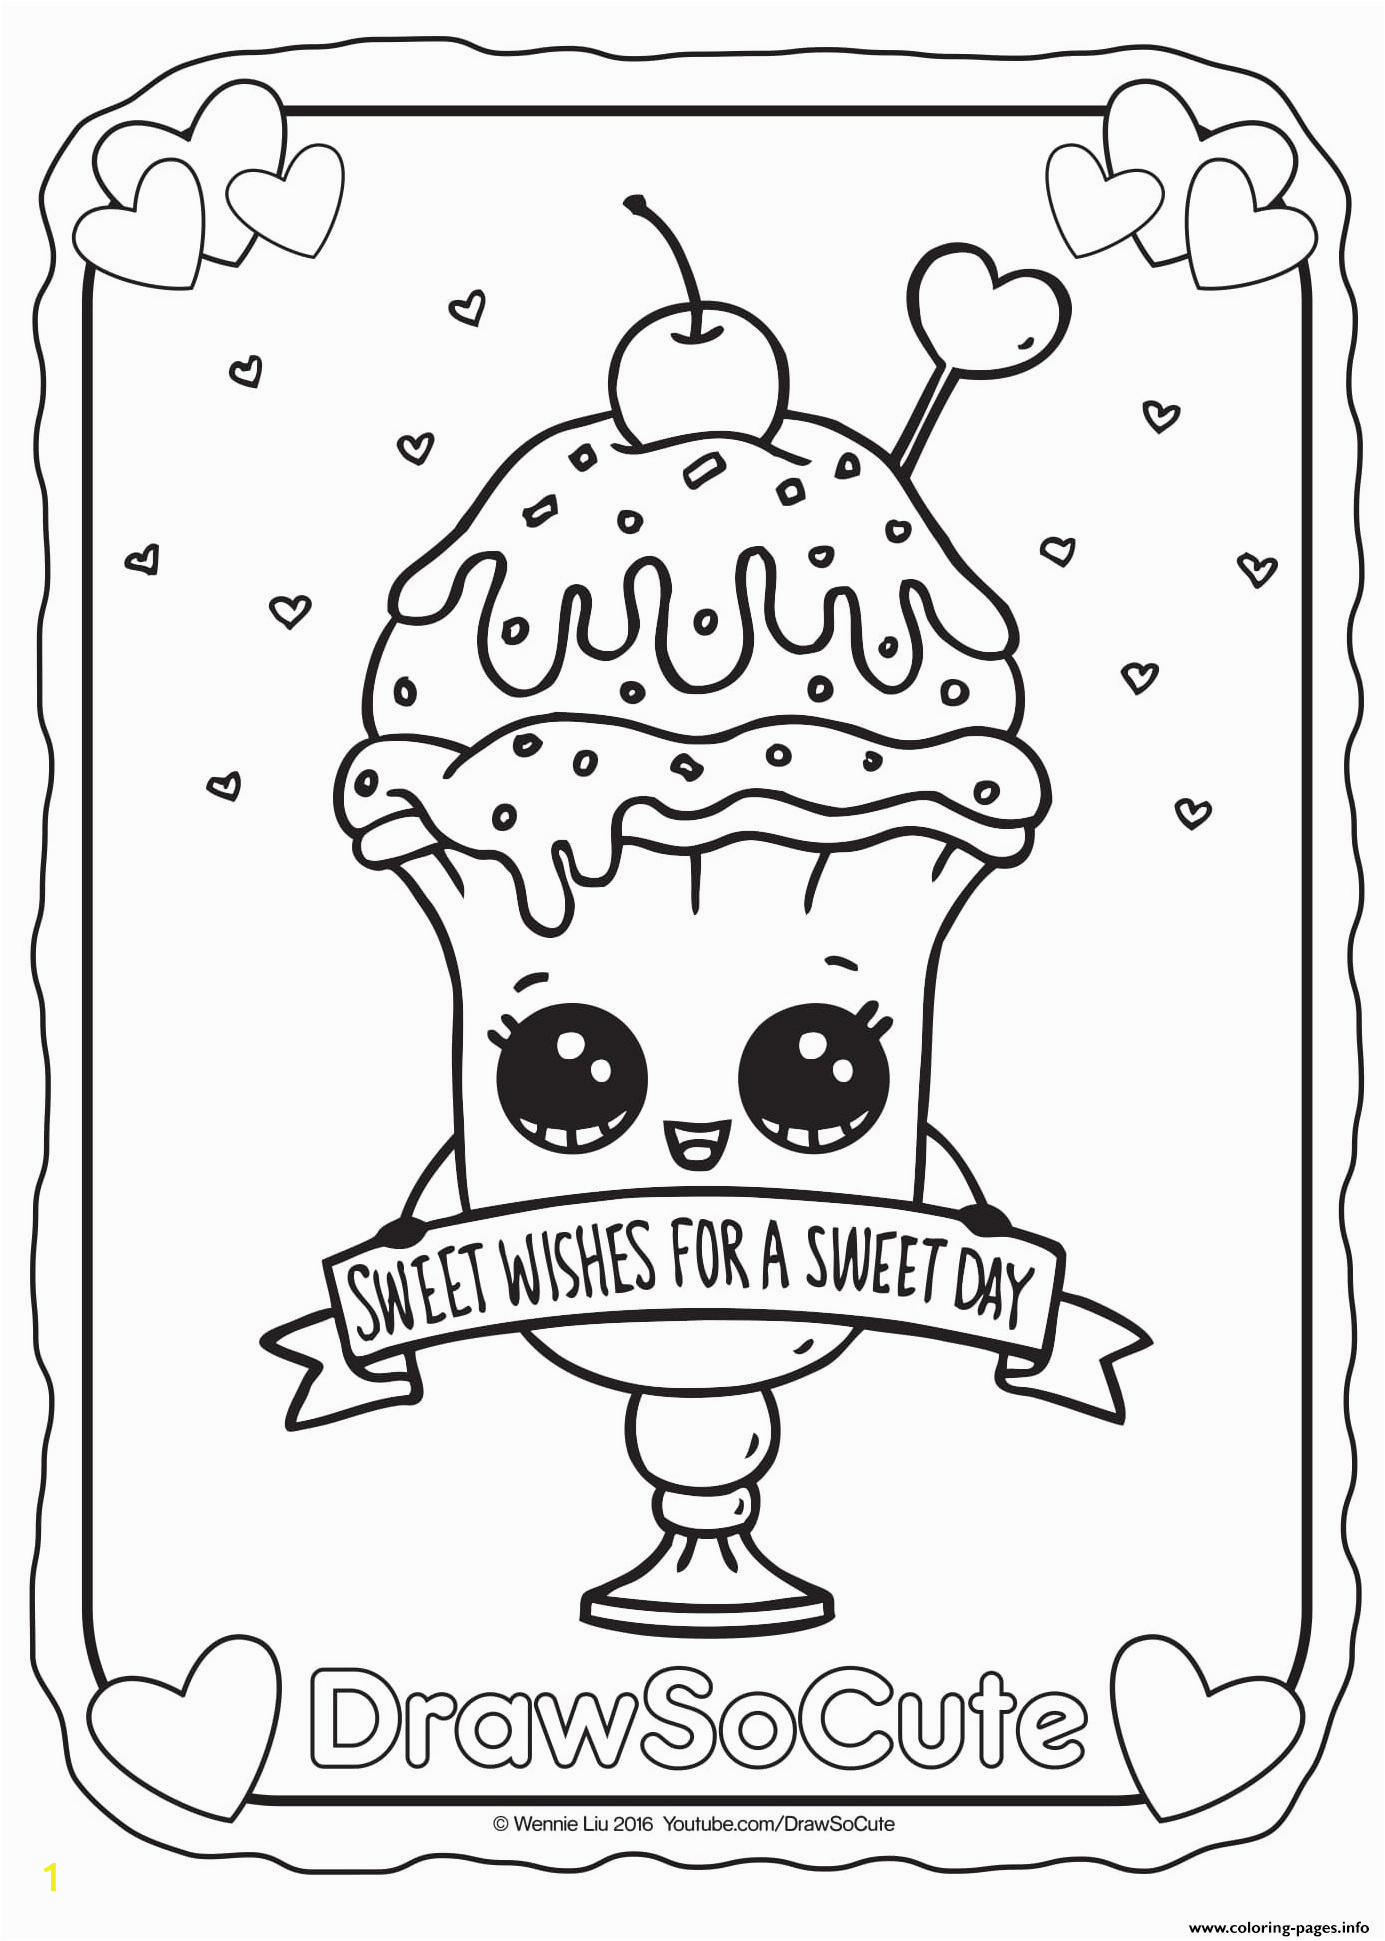 Printable Food Coloring Pages Coloring Book Naturalod Coloring Free to Printr